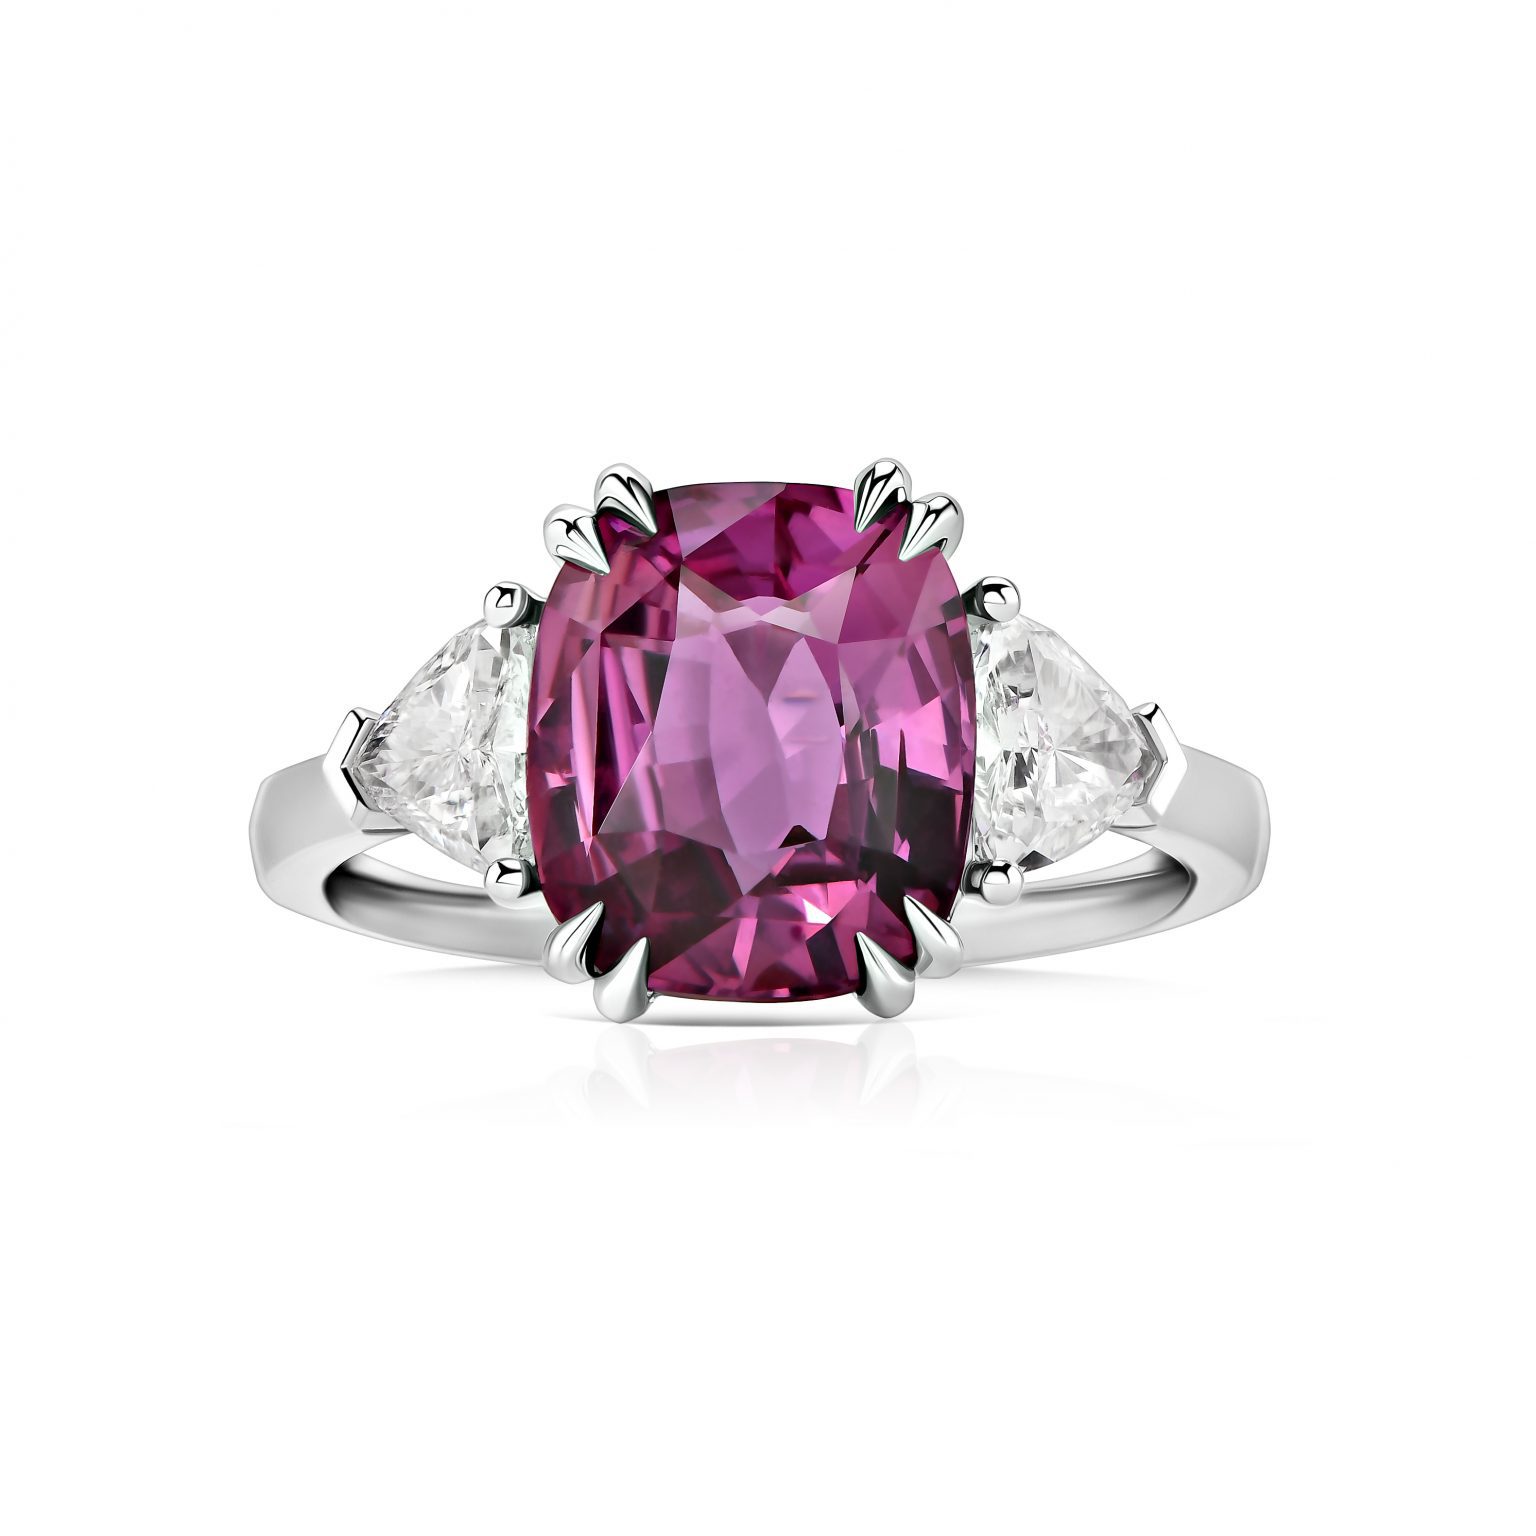 4.52 ct Cushion-Cut Spinel and Diamond Ring